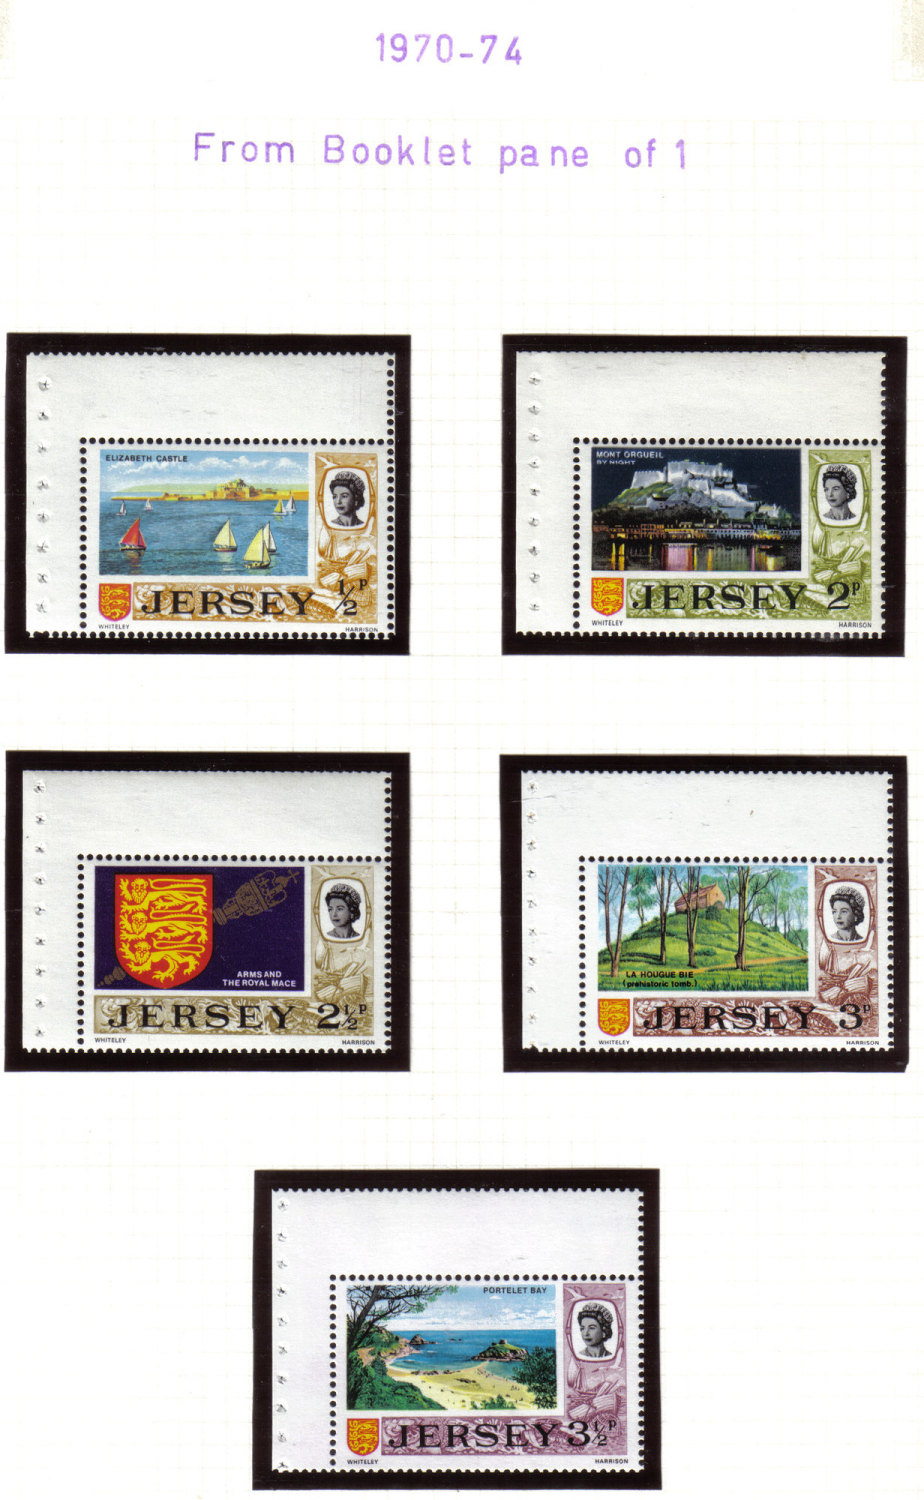 Jersey Stamps 1970-74 Booklet Panes - USED and MINT (z532)